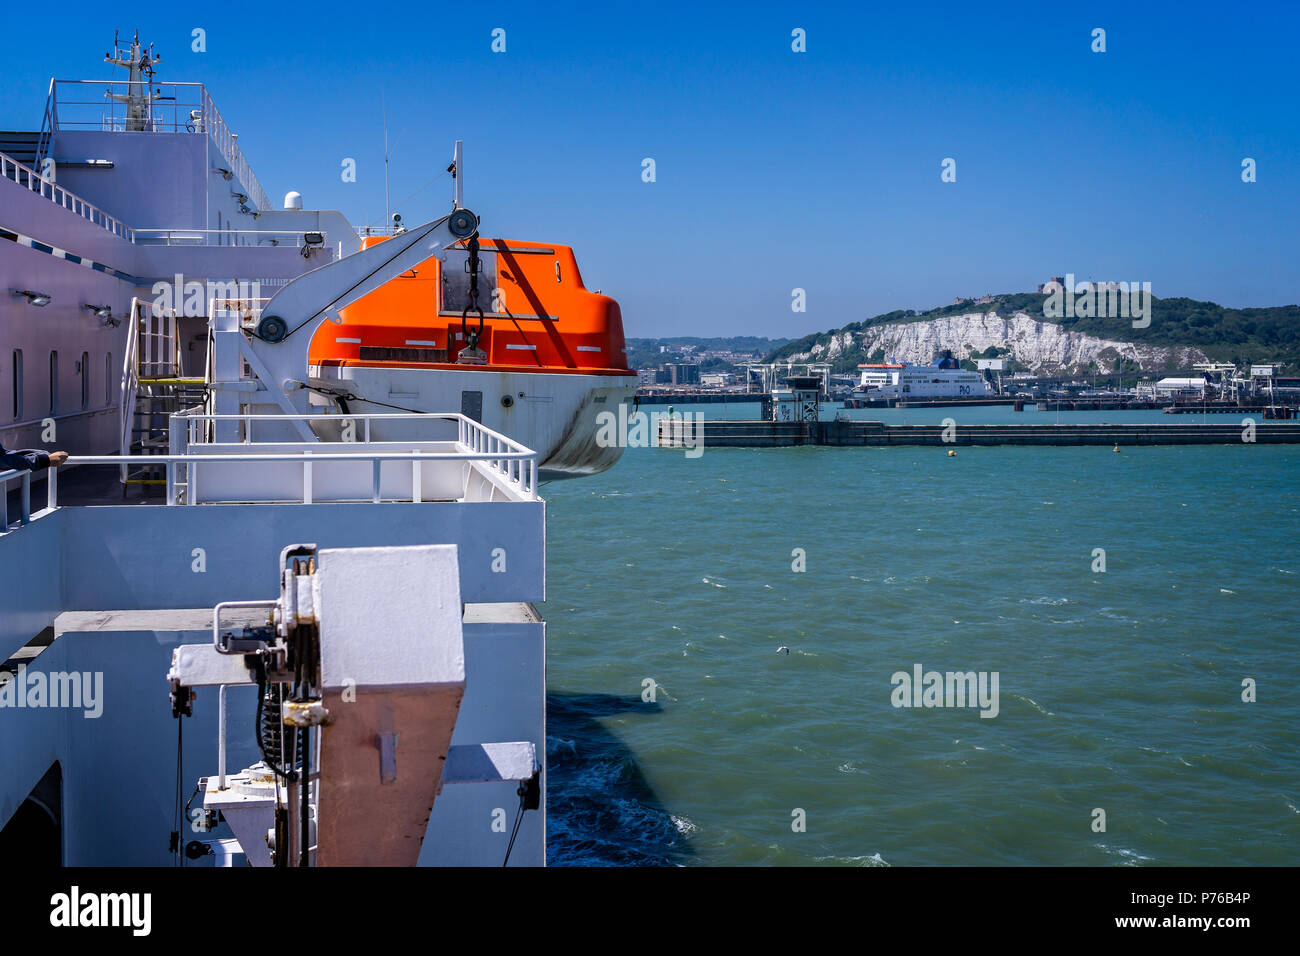 Ferry coming in to dock at Dover Port taken from a ferry in Dover, Kent, UK on 30 June 2018 Stock Photo